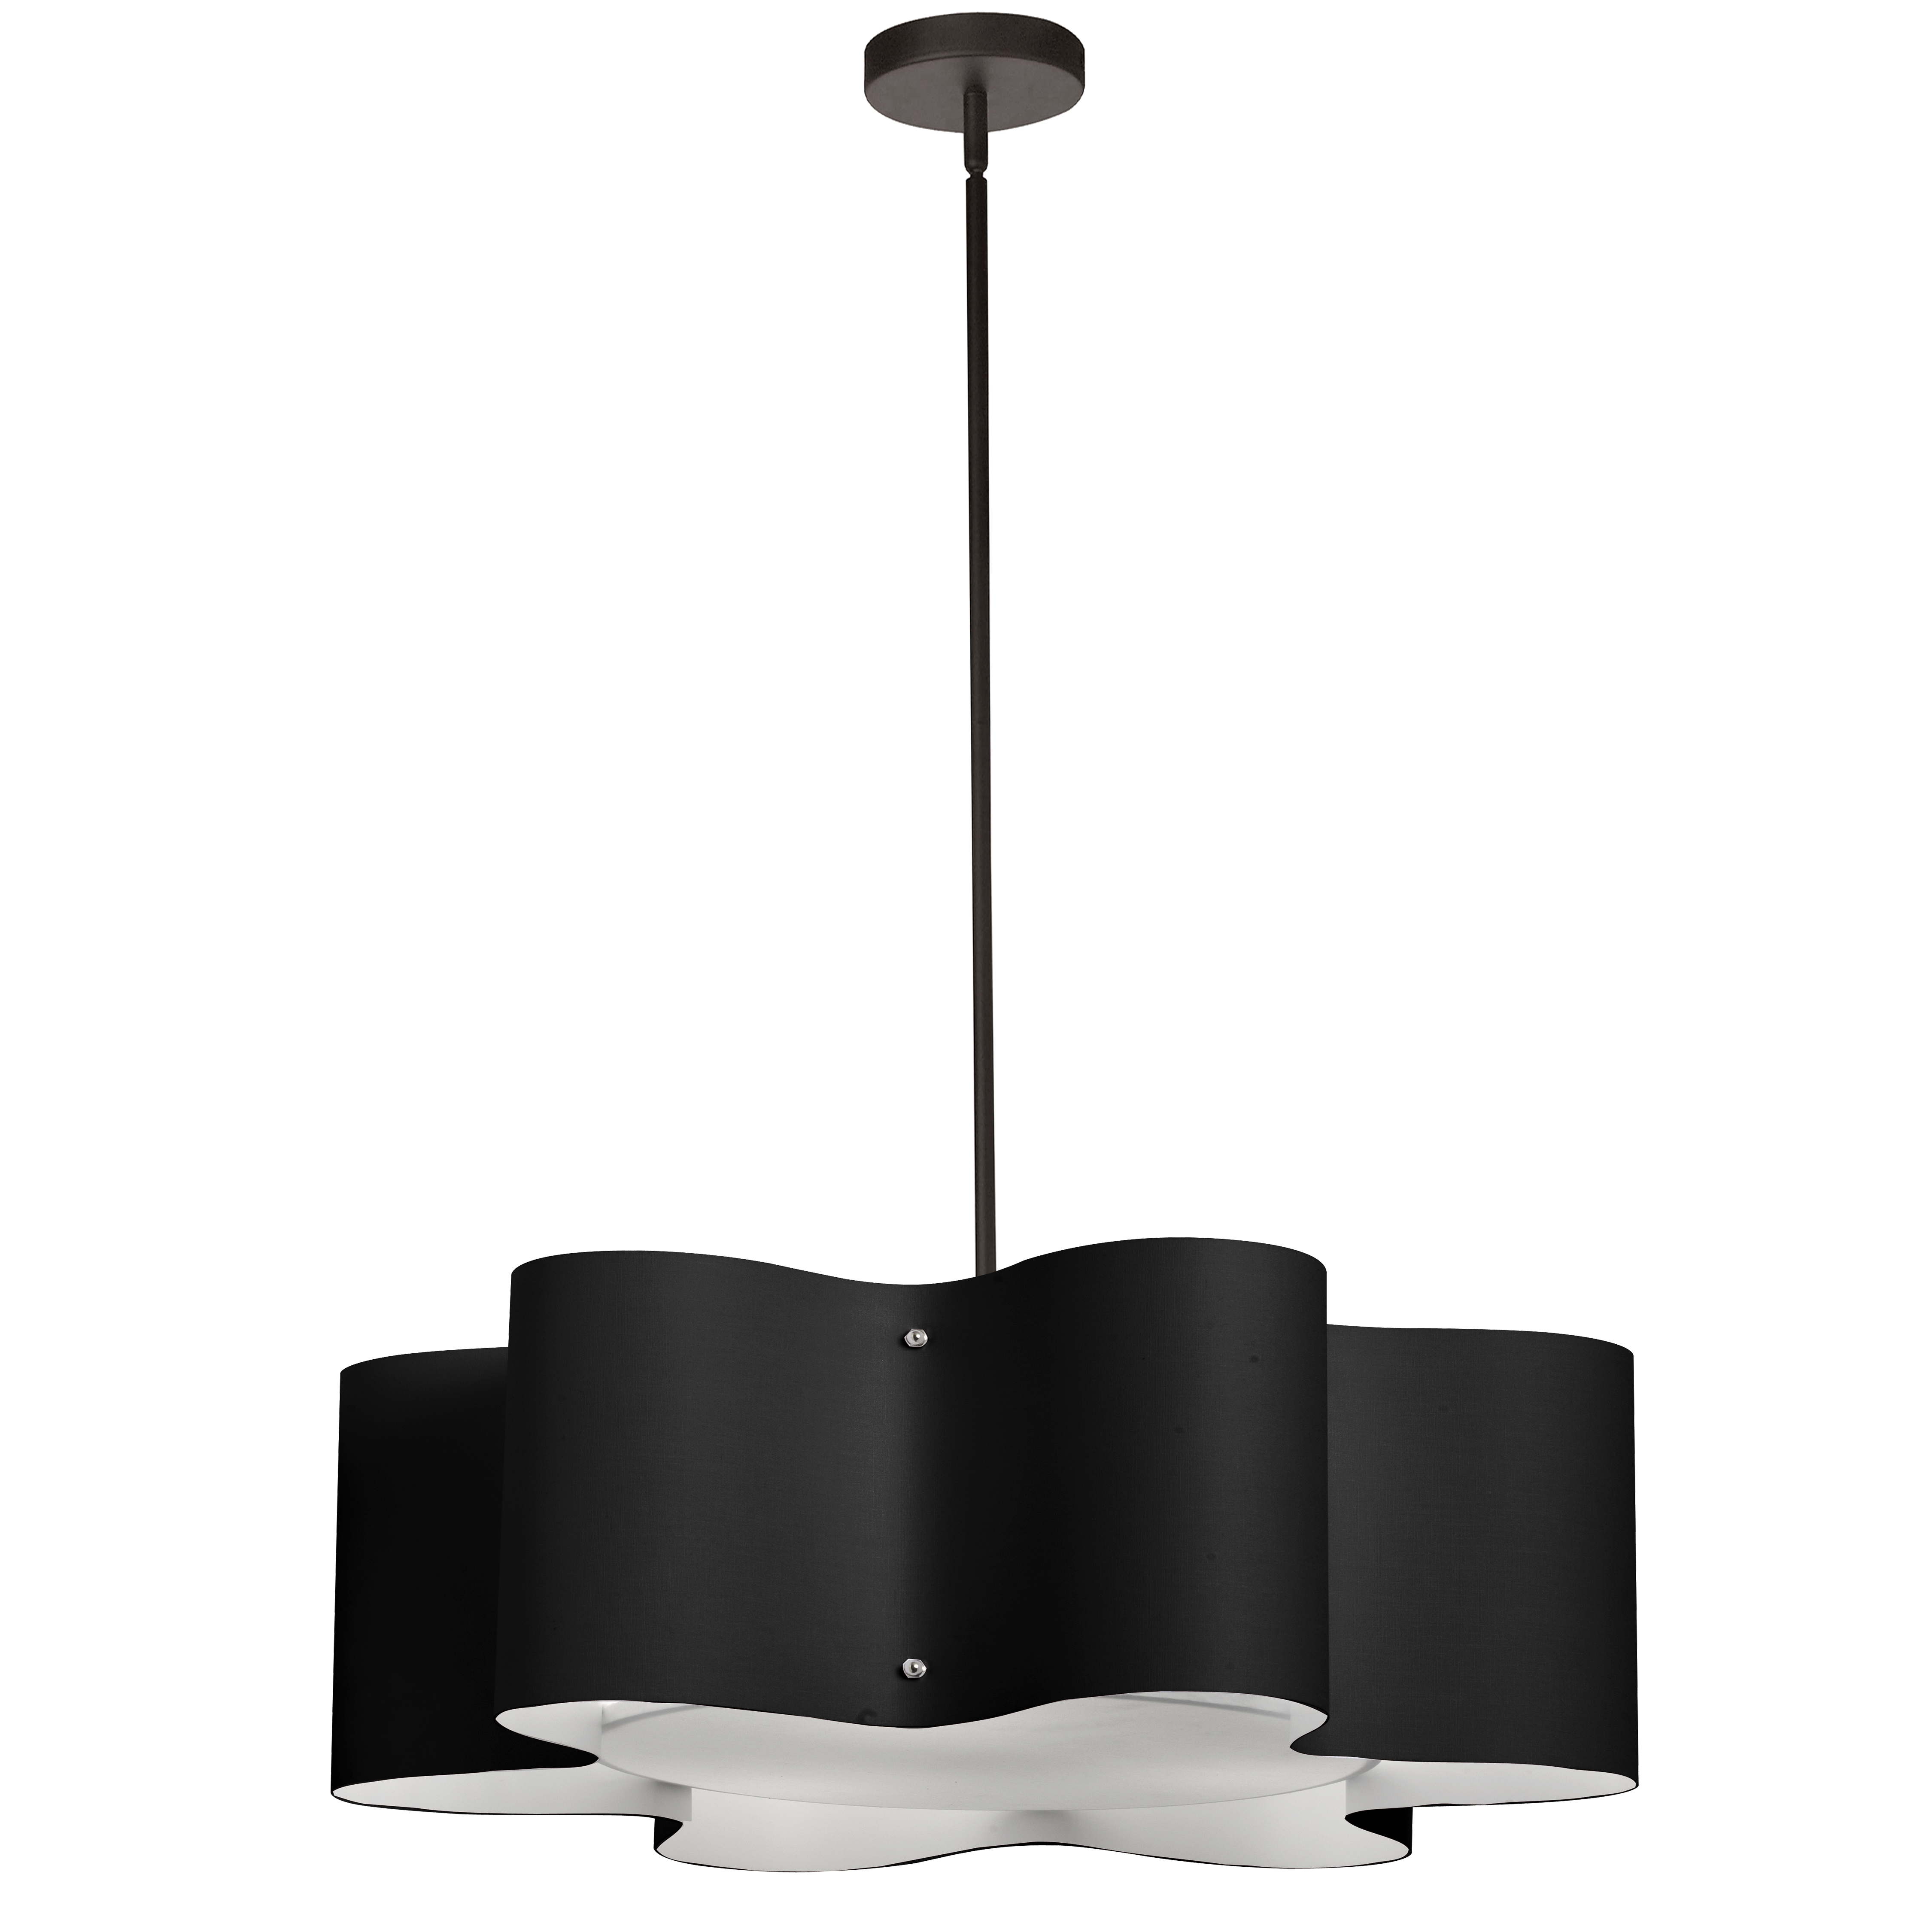 Youll add a bold and dramatic note to any room with the eye catching Zulu family of lighting. The design features a unique shade with six rounded edges over a circular fixture for a singular look.  The Zulu lighting design has elements of Pop Art appeal and will add a distinctive finish to any contemporary room from the kitchen to the bedroom and back to the living and dining rooms. Custom colour options include black and red shades in addition to neutral white for pendant lighting that adds much more than light to your home.